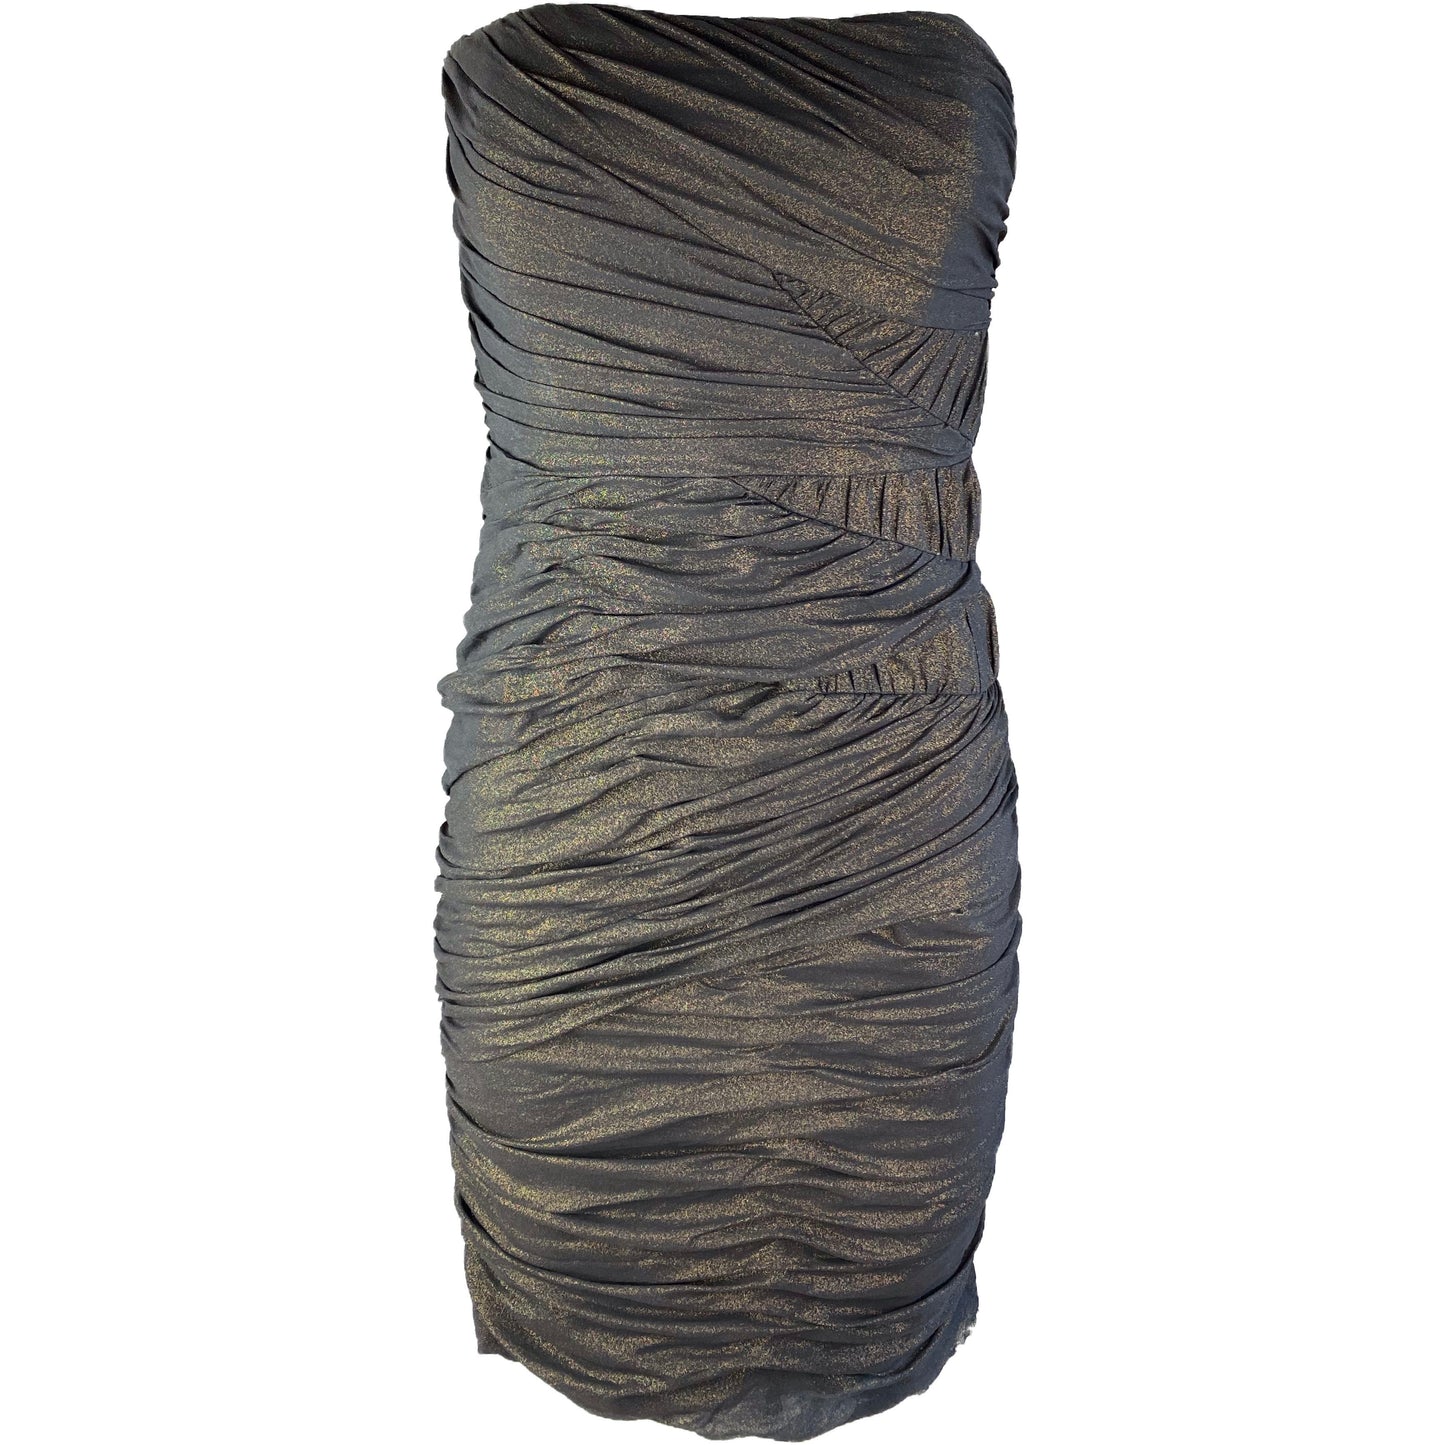 Badgley Mischka Black and Gold Ruched Bodycon Cocktail Dress